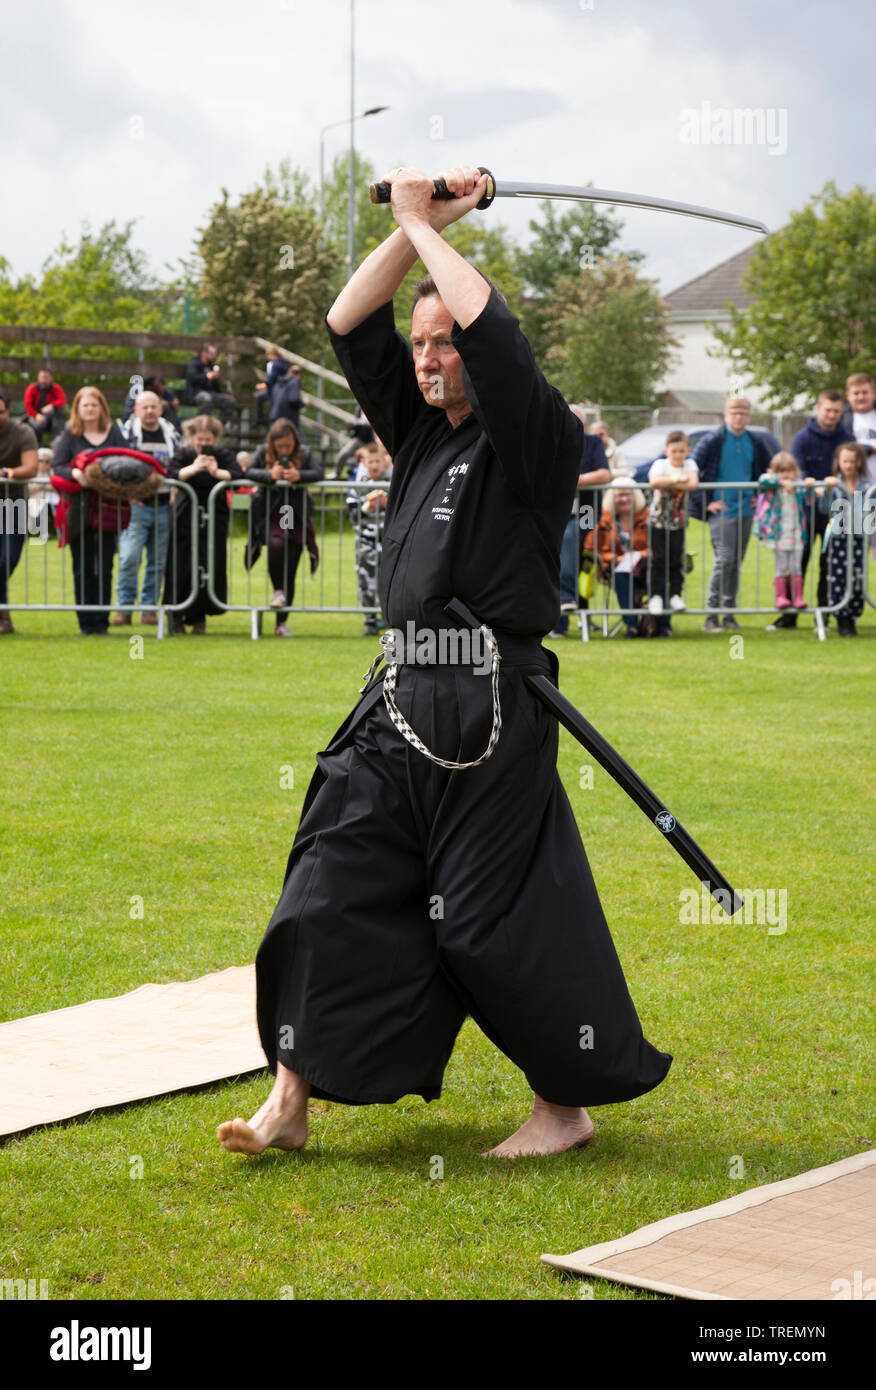 Demonstration of samurai martial art with a sword at Helensburgh and Lomond Highland Games, Argyll, Scotland Stock Photo